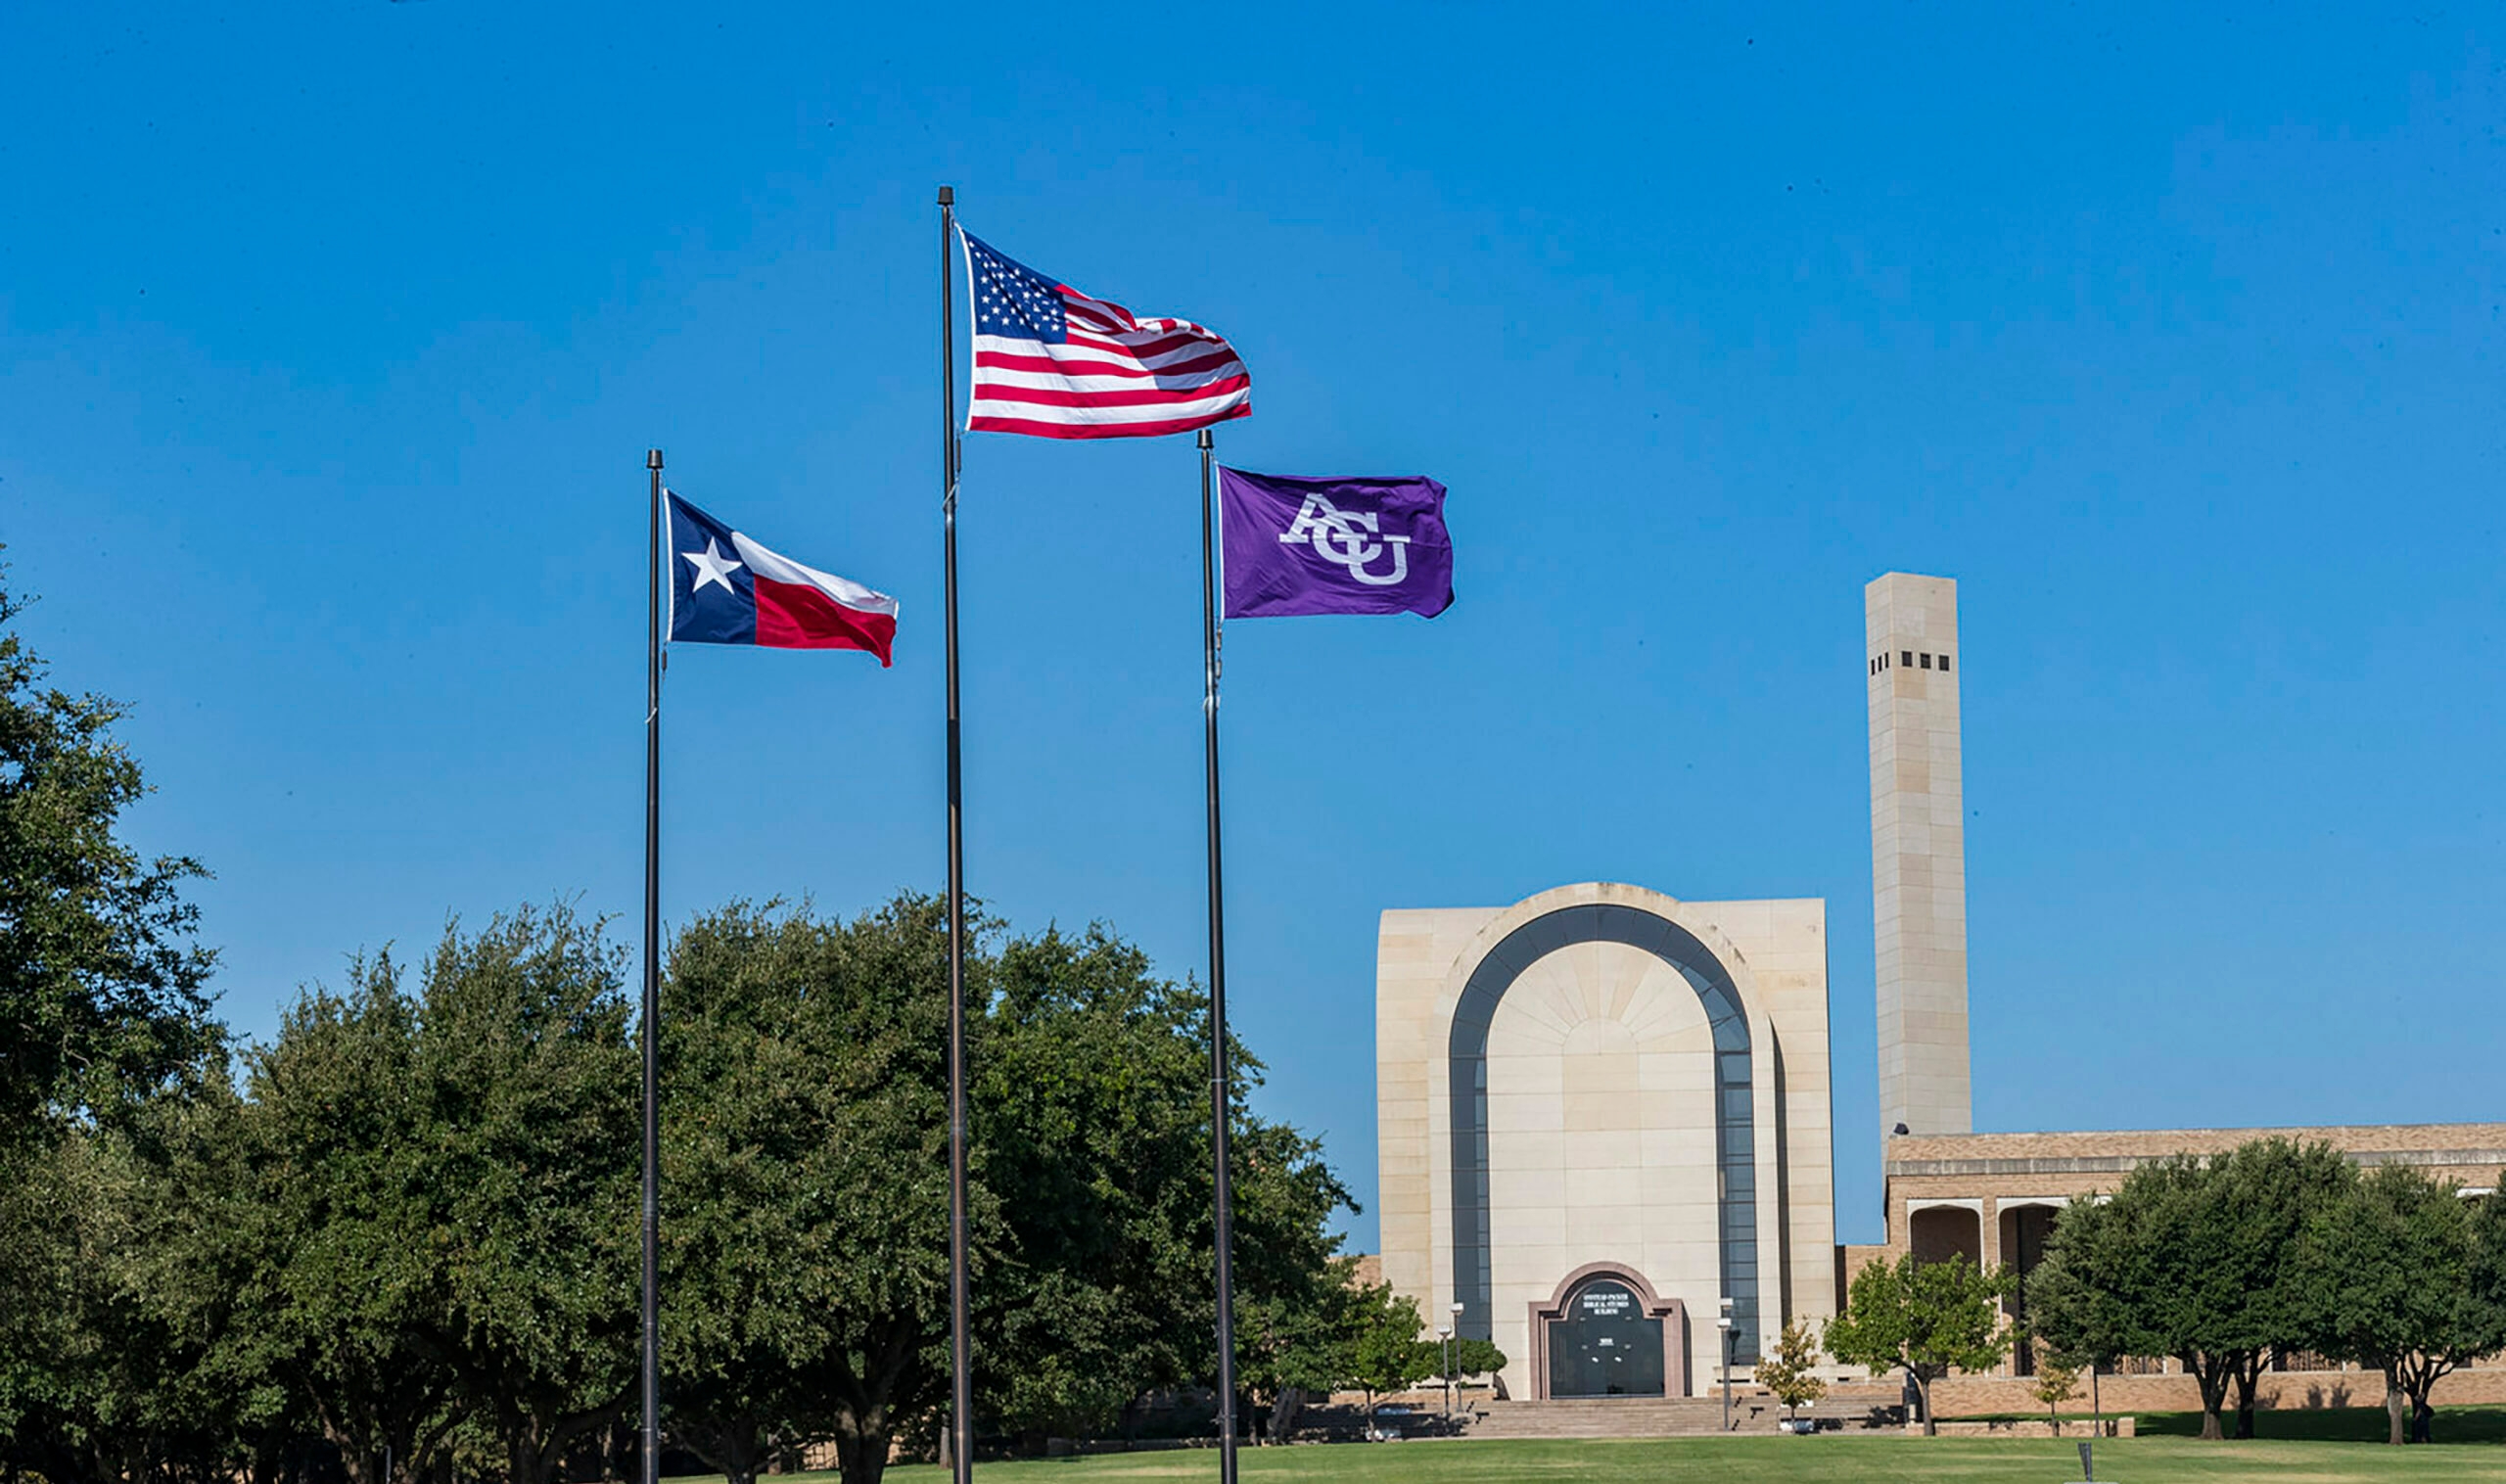 The flags of Texas, America, and ACU waving in the wind